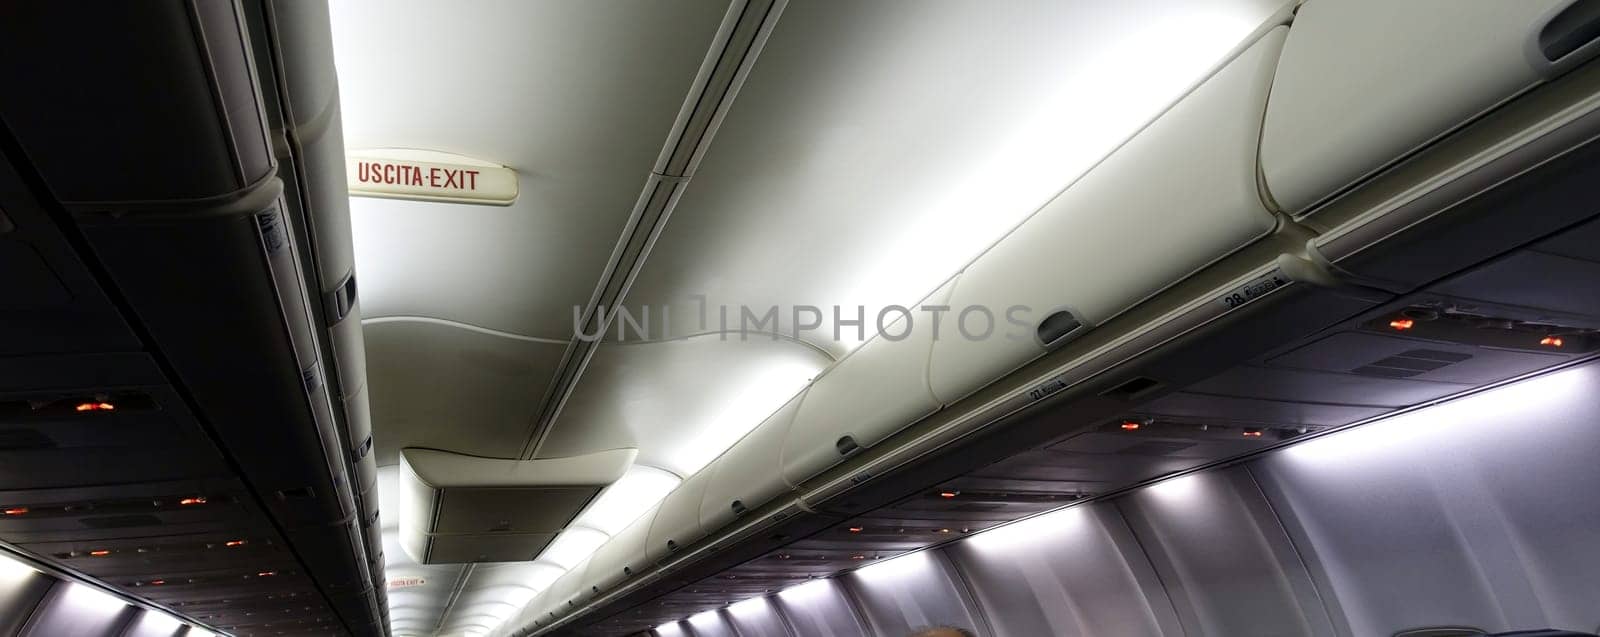 The interior ceiling of the fuselage of an airliner.